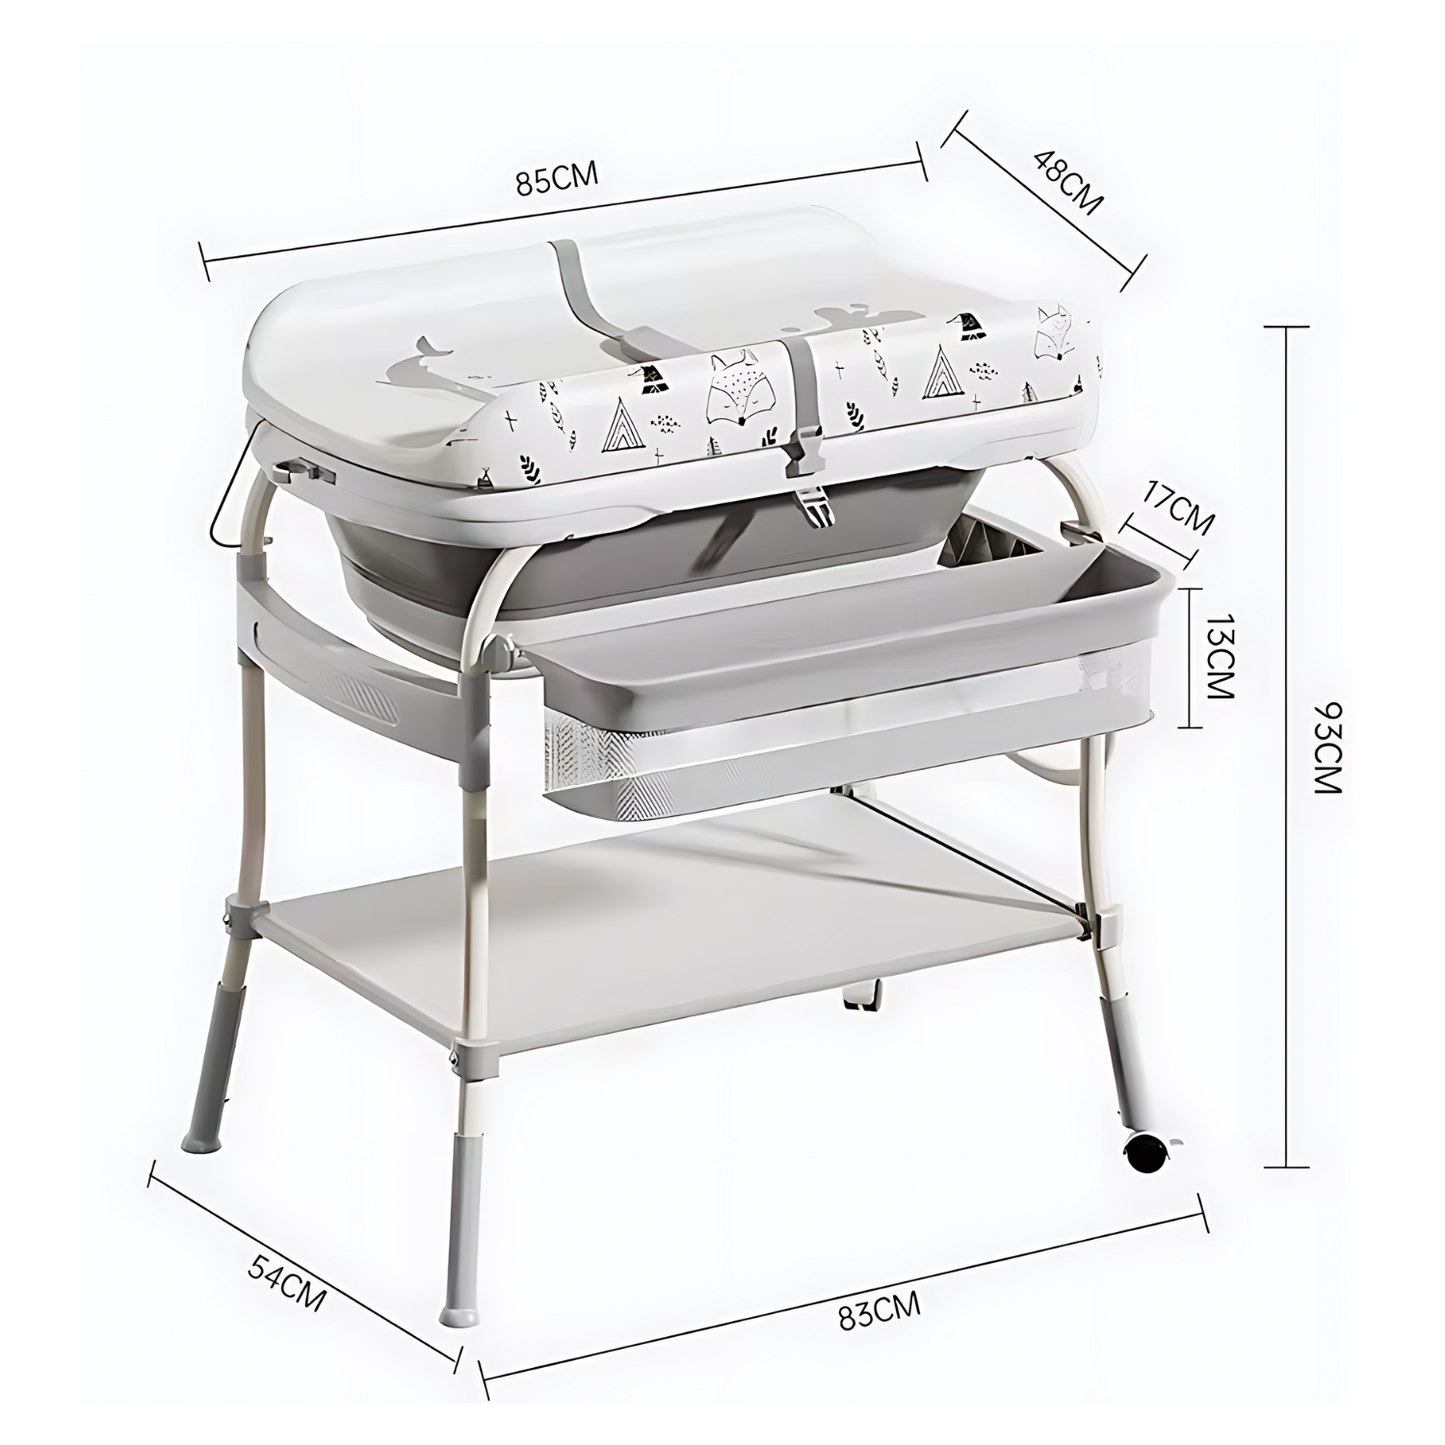 Lalalu Foldable Baby Changing Table with Built-In Bathtub 2-in-1